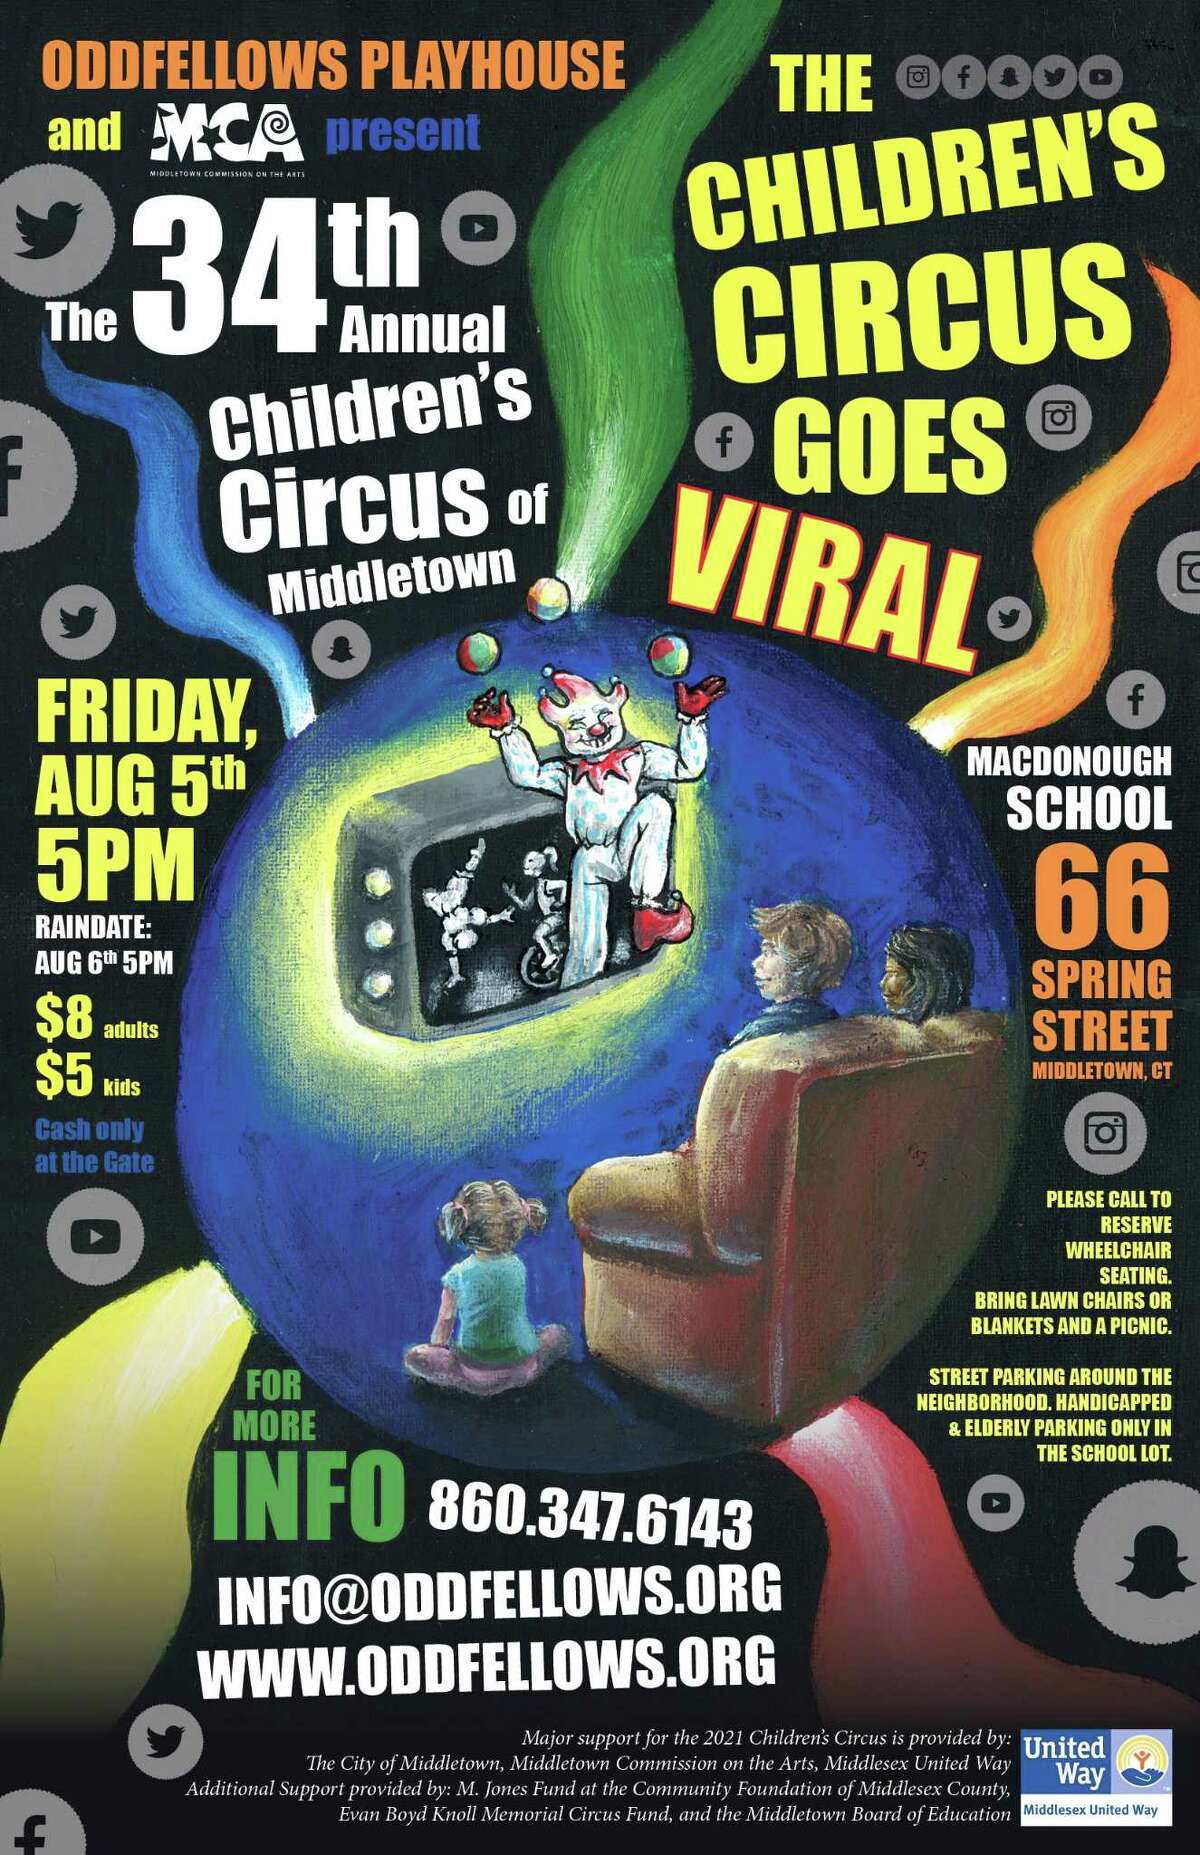 The Middletown Commission on the Arts and Oddfellows Playhouse will premiere the 34th Children’s Circus of Middletown, themed “Children’s Circus Goes Viral!”